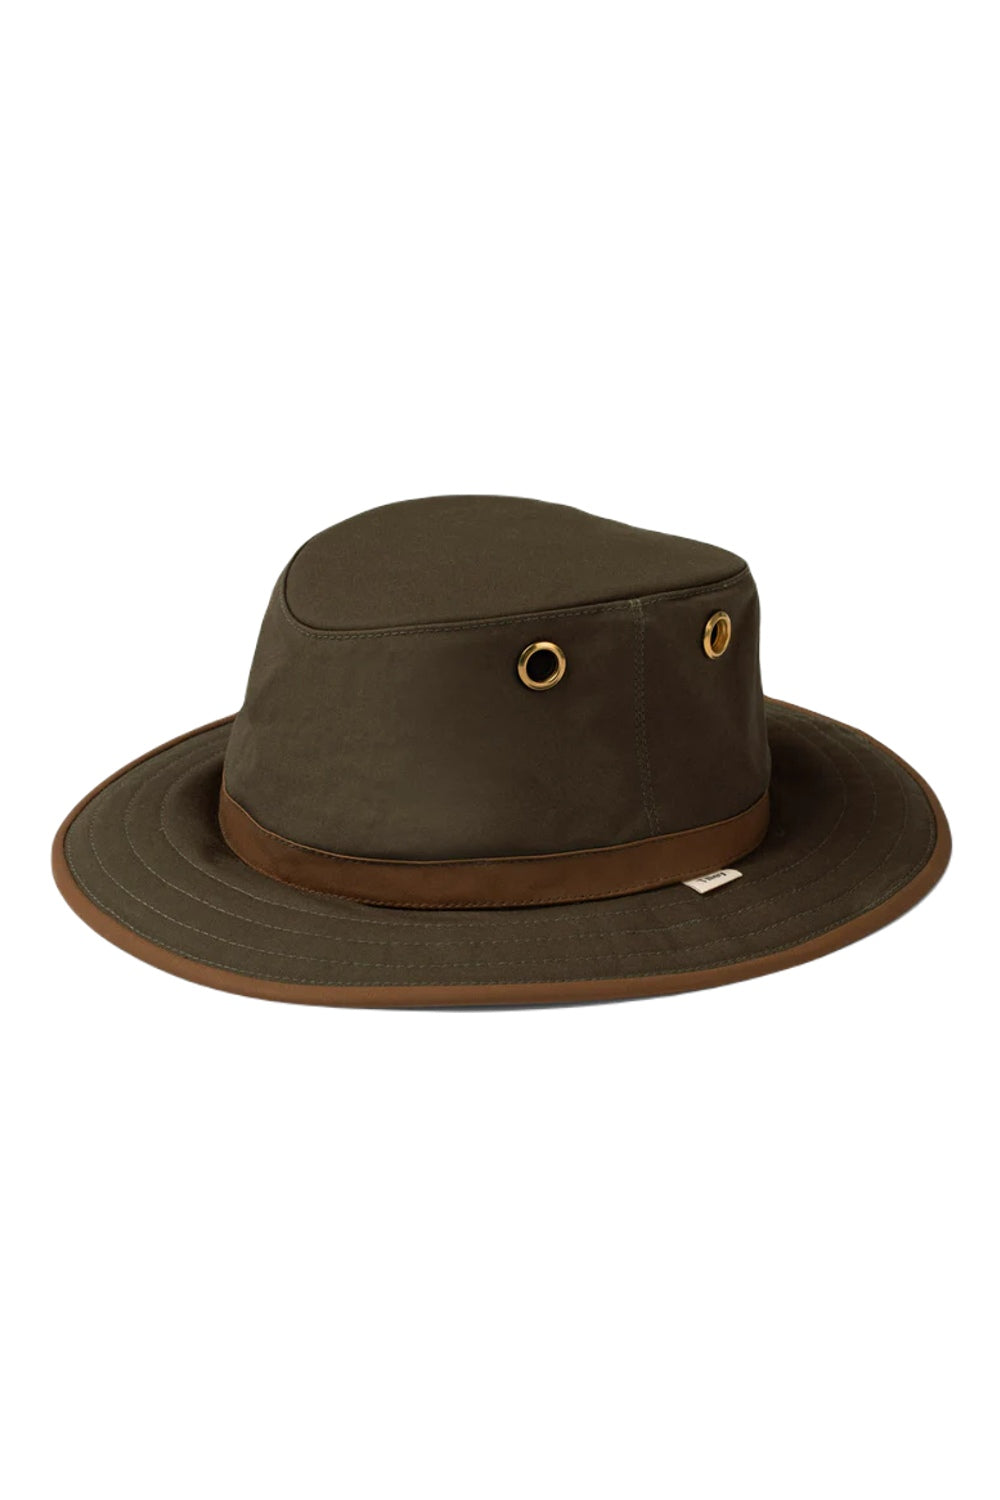 Tilley Hats Outback Waxed Cotton Hat In Green/British Tan 